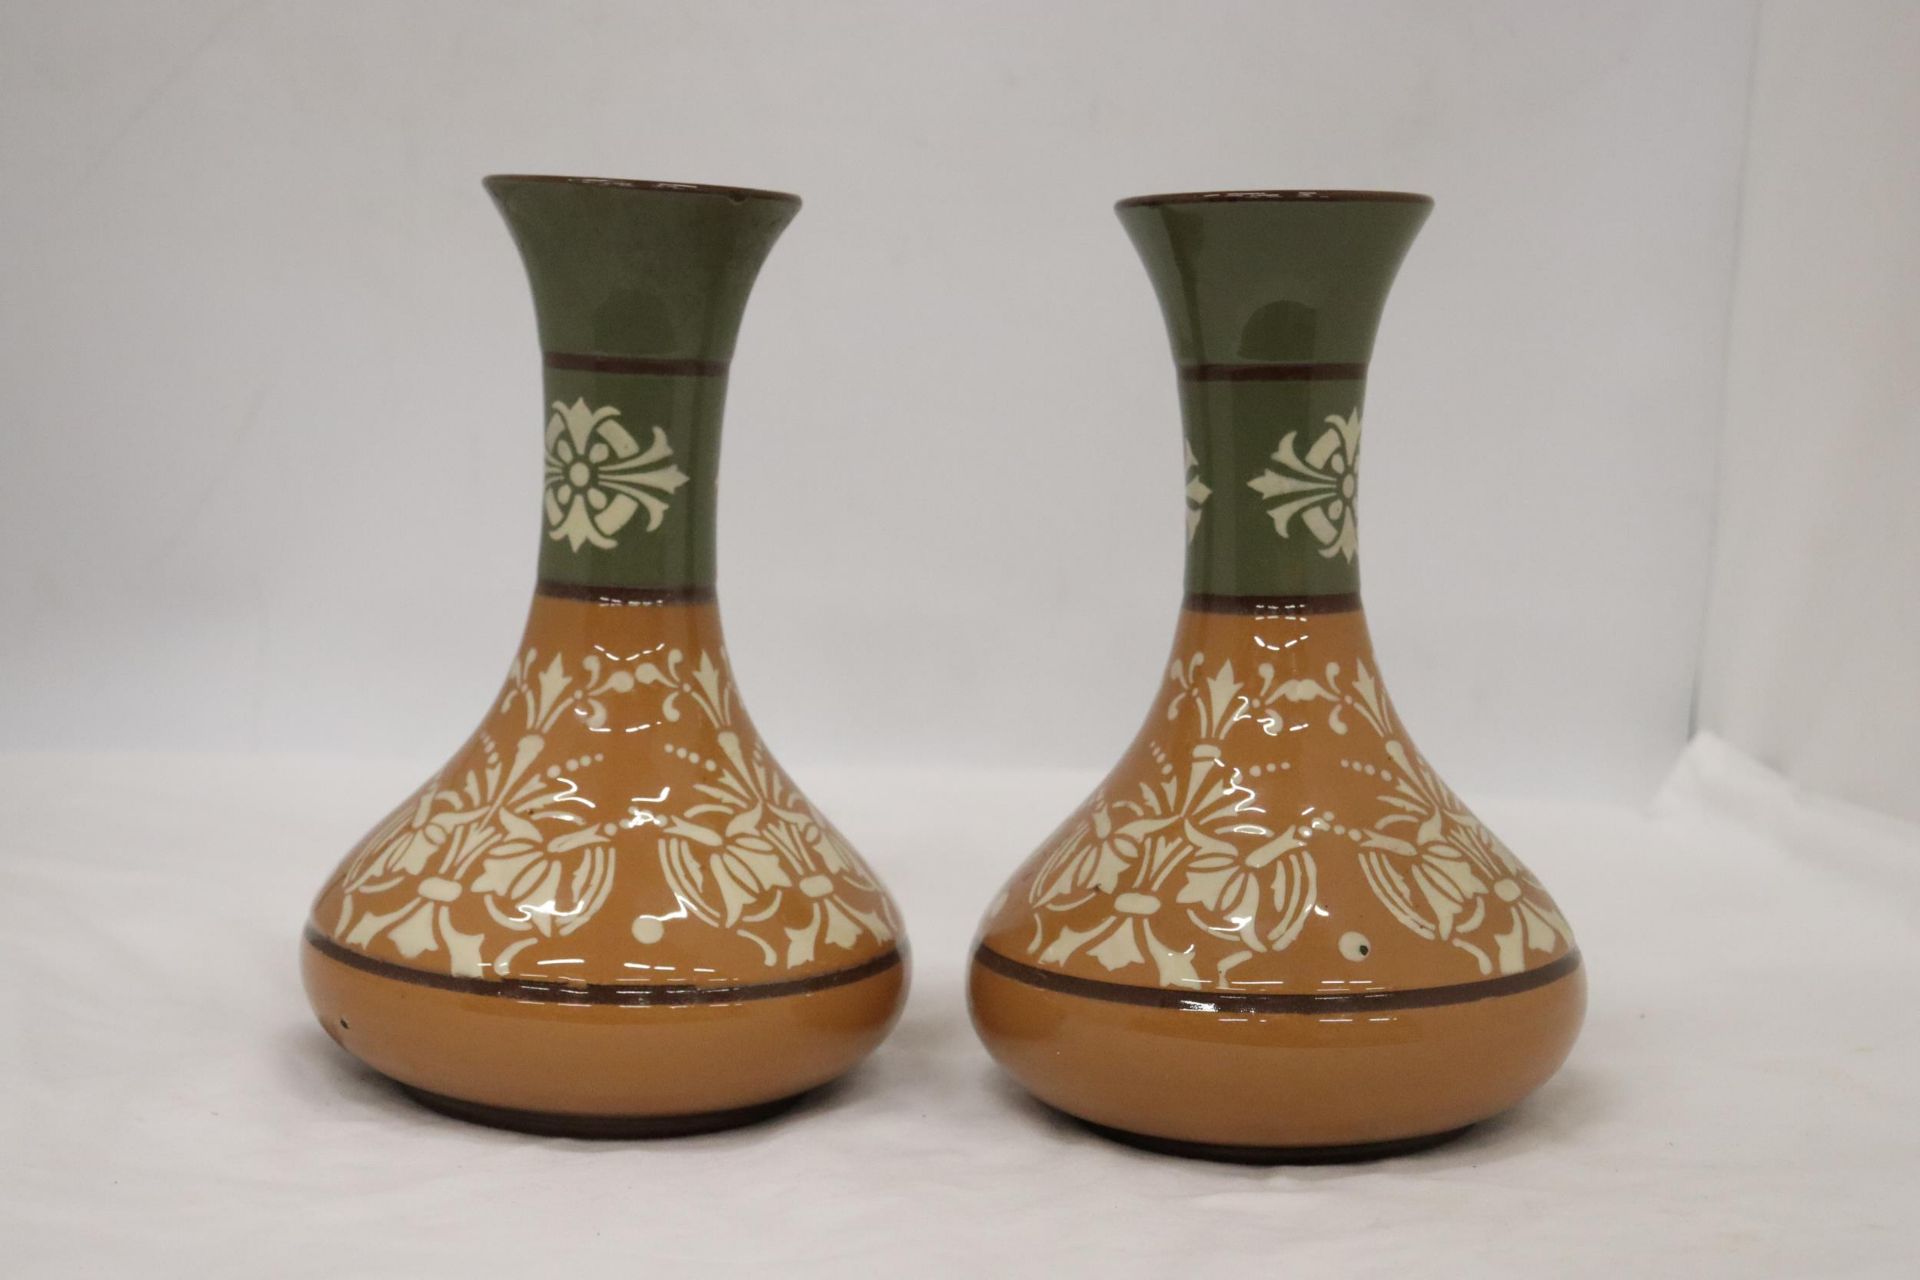 A PAIR OF LANGLEY LOVIQUE WARE ART POTTERY VASES